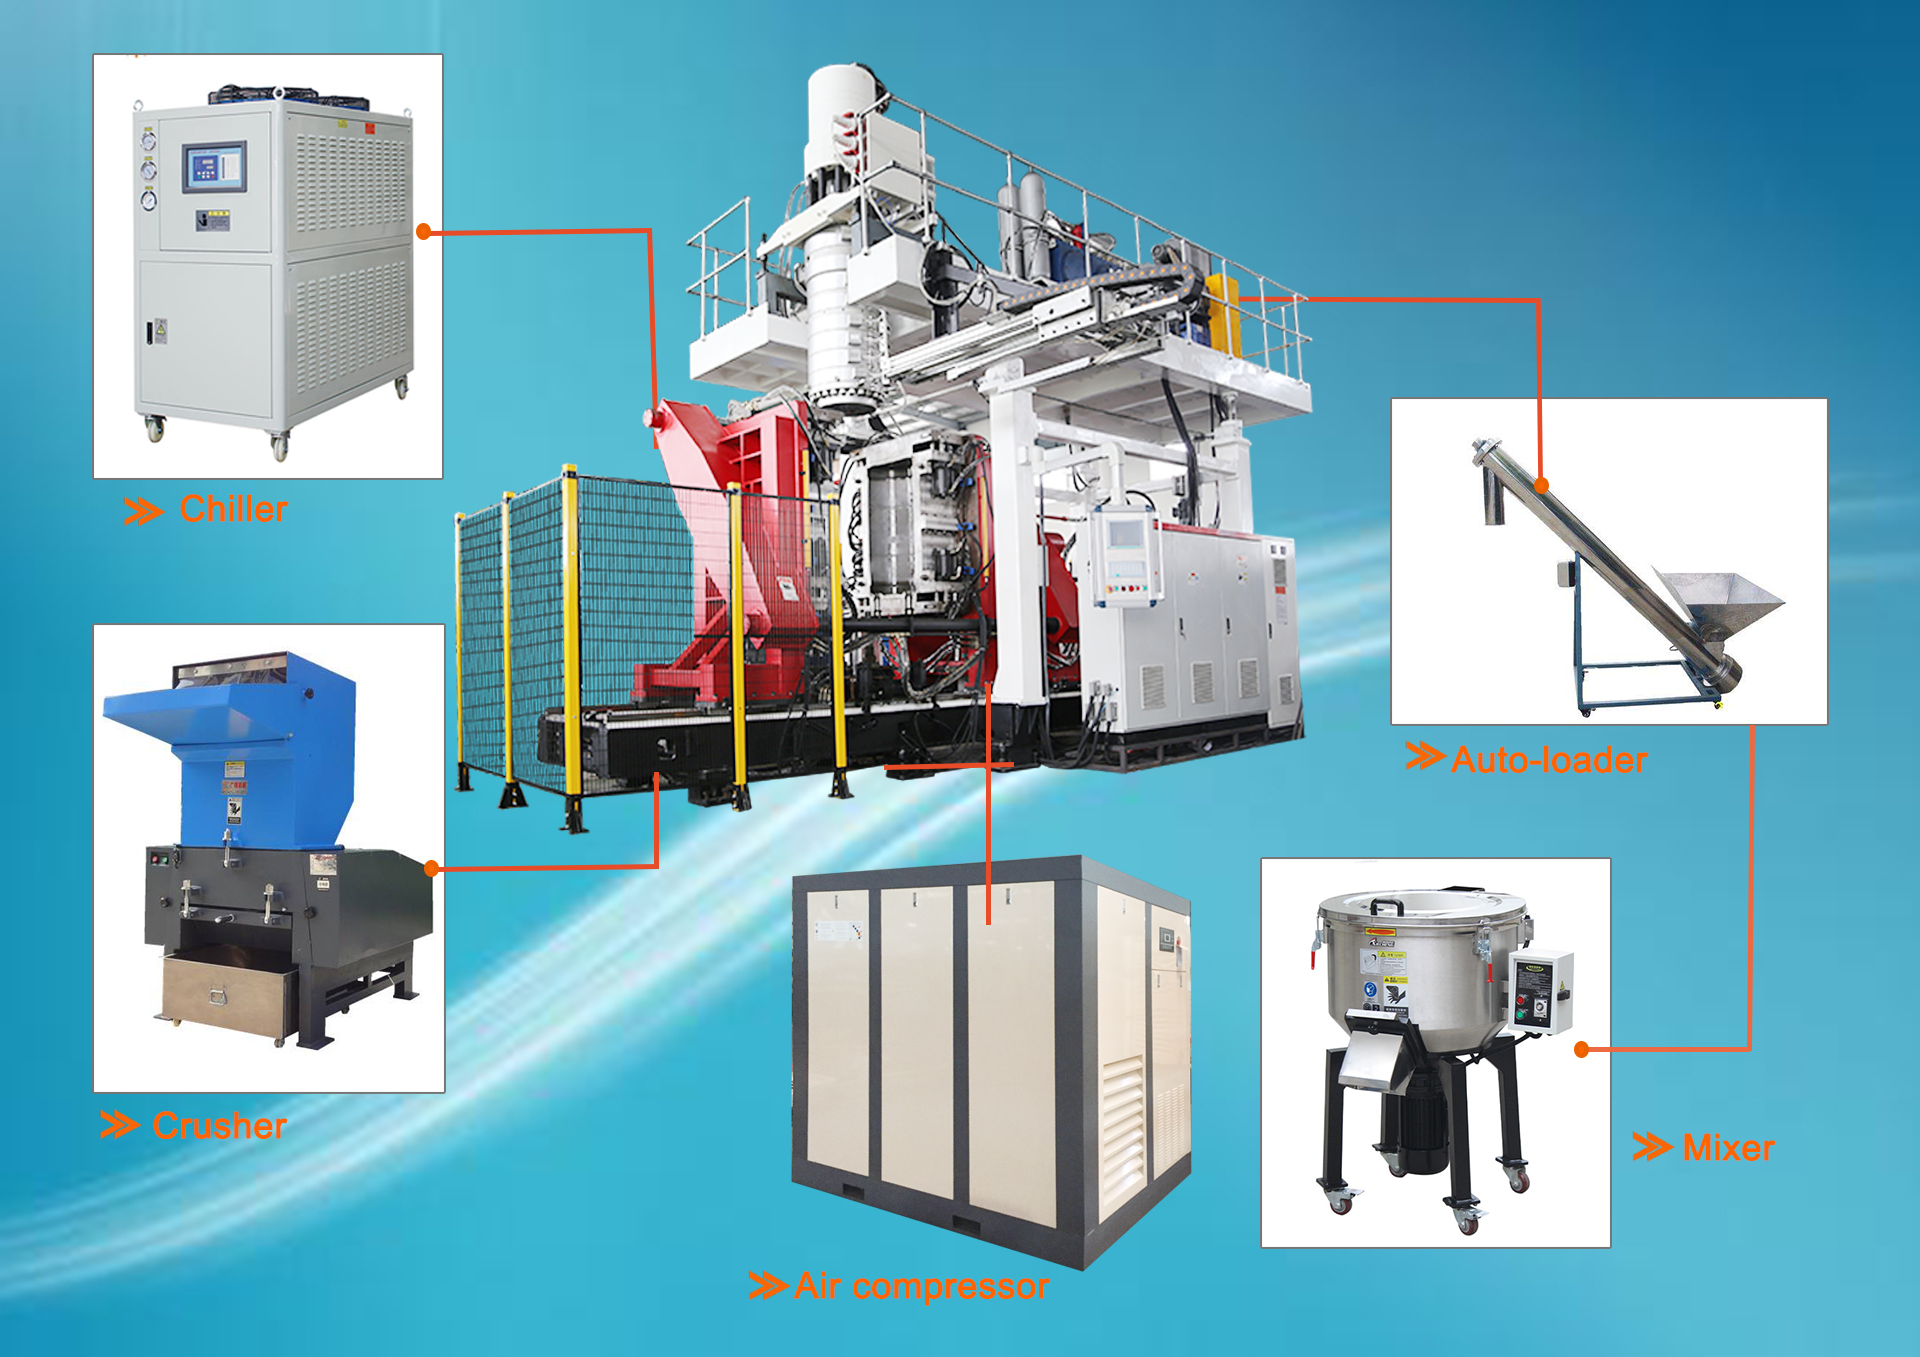 Extrusion blow molding machine & auxiliary machines